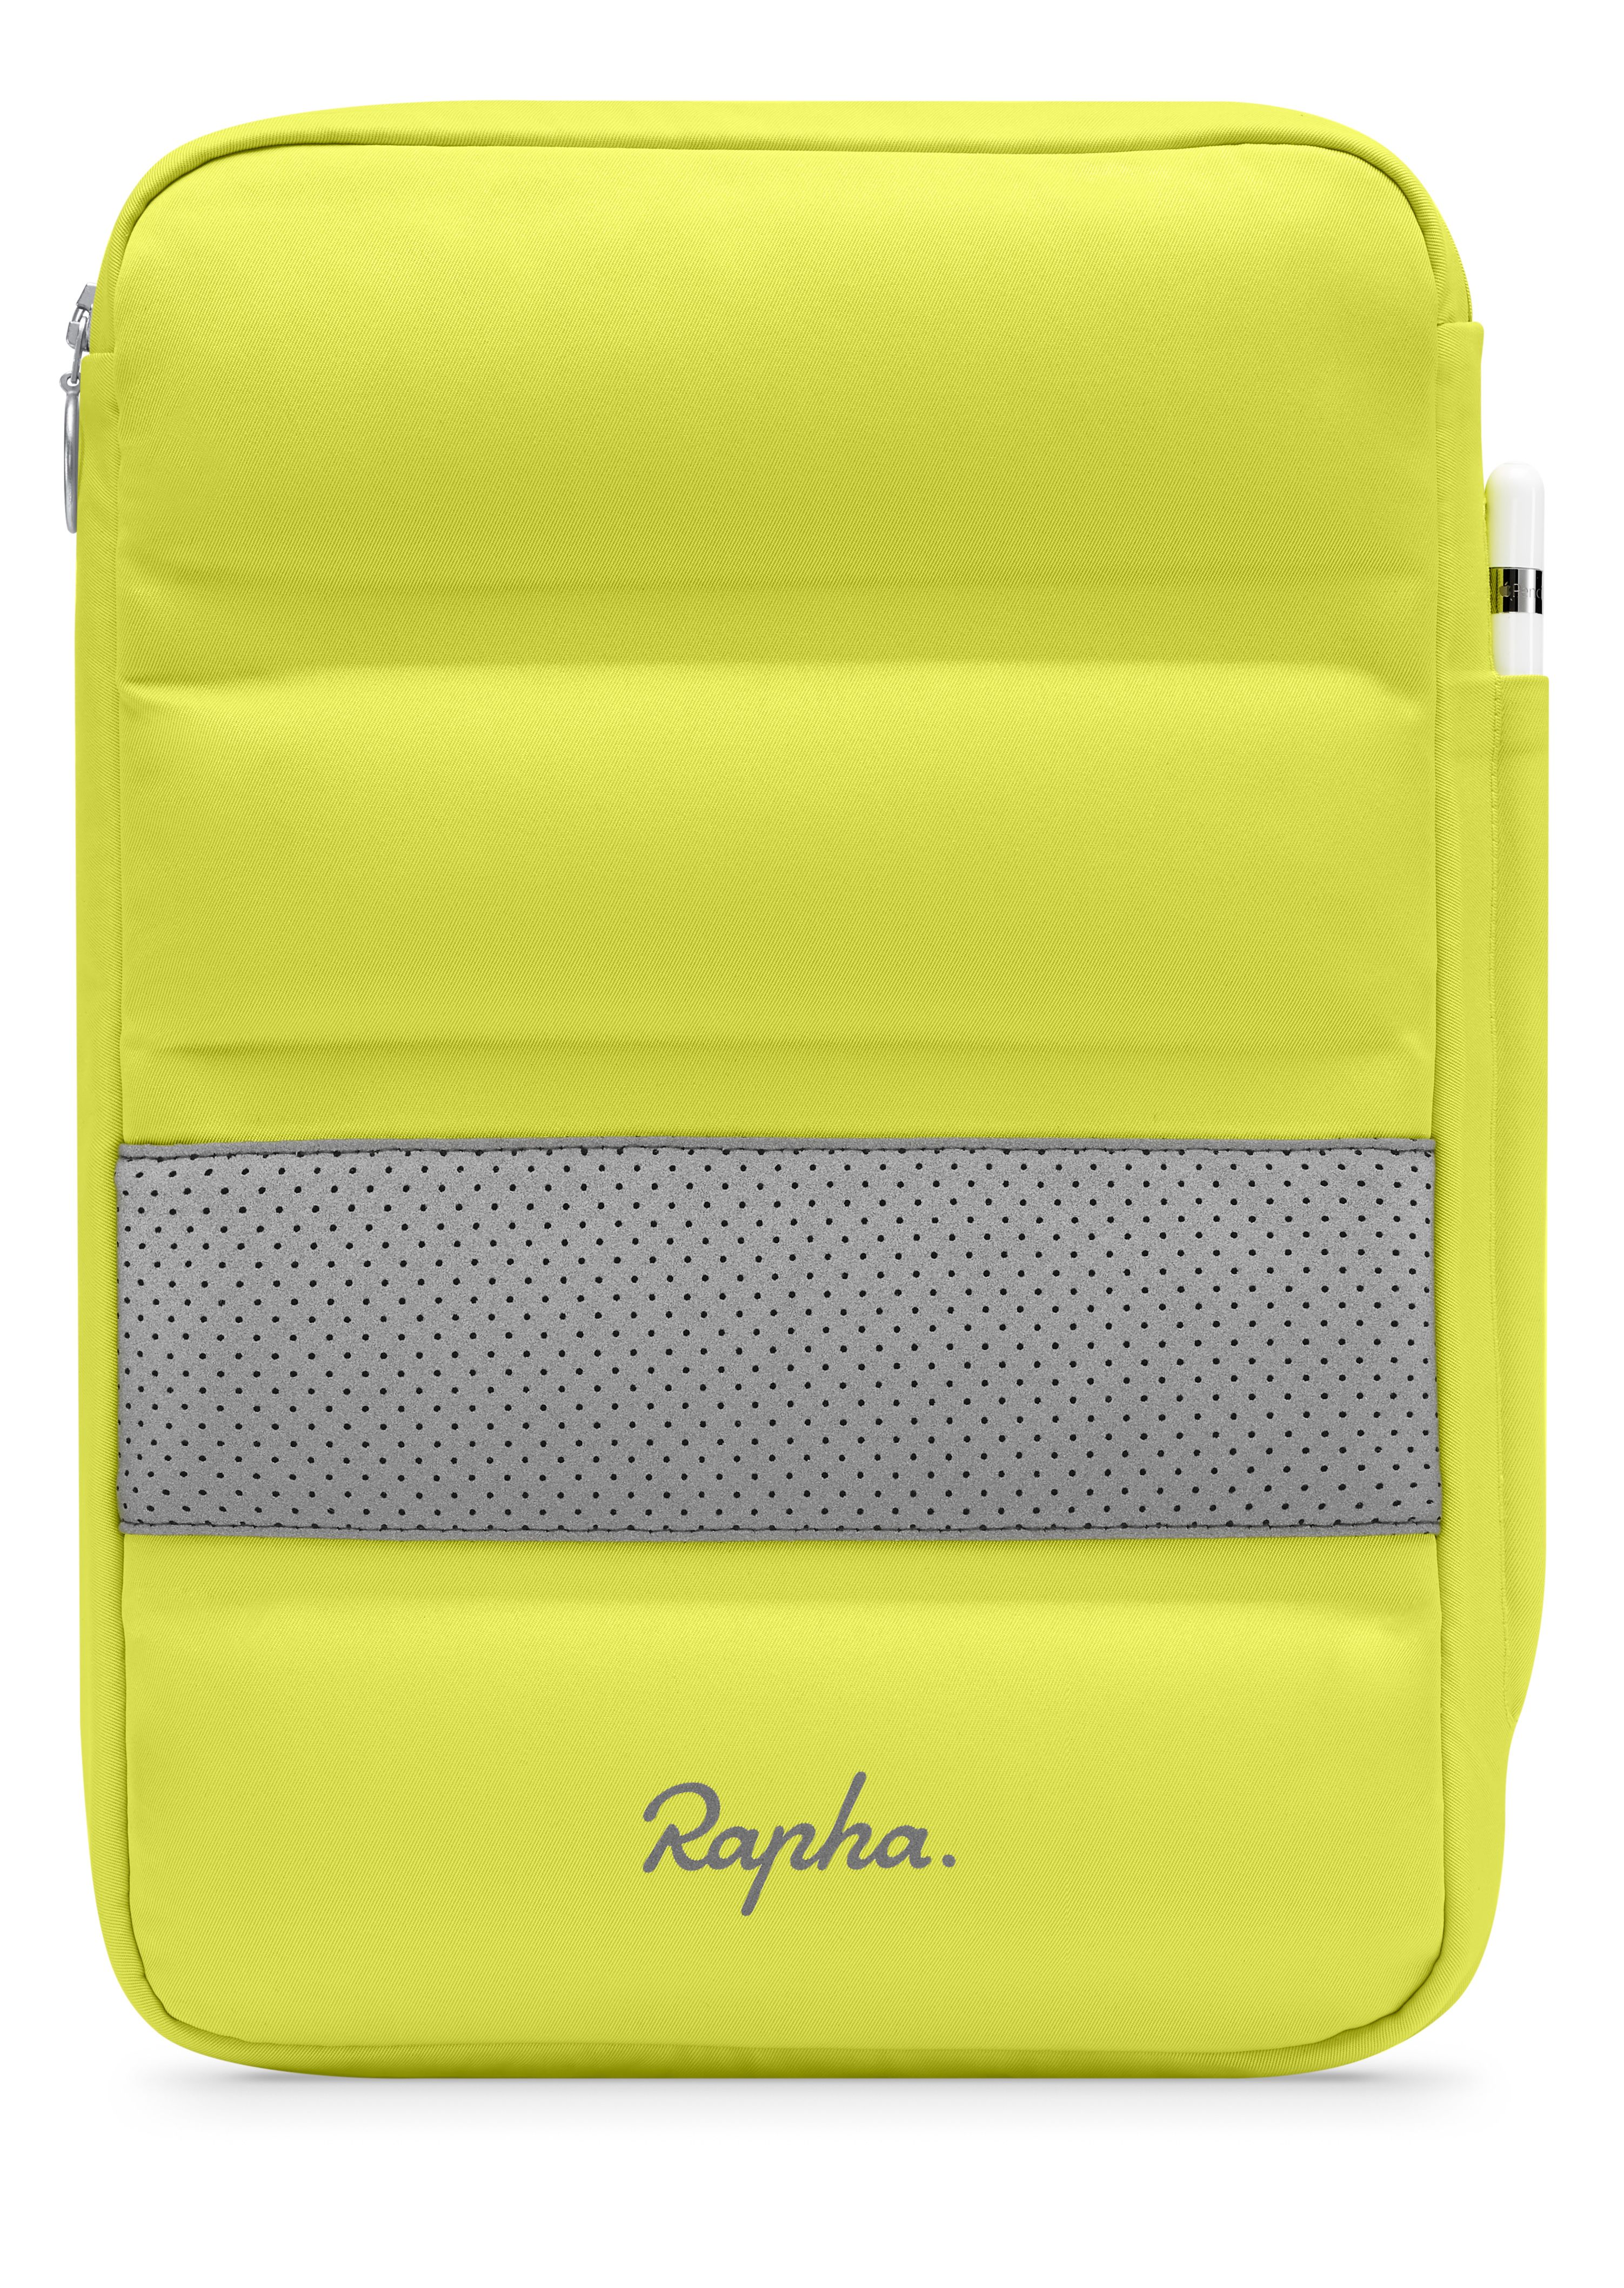 Rapha and Apple Make Predictably Gorgeous Commuter Bags